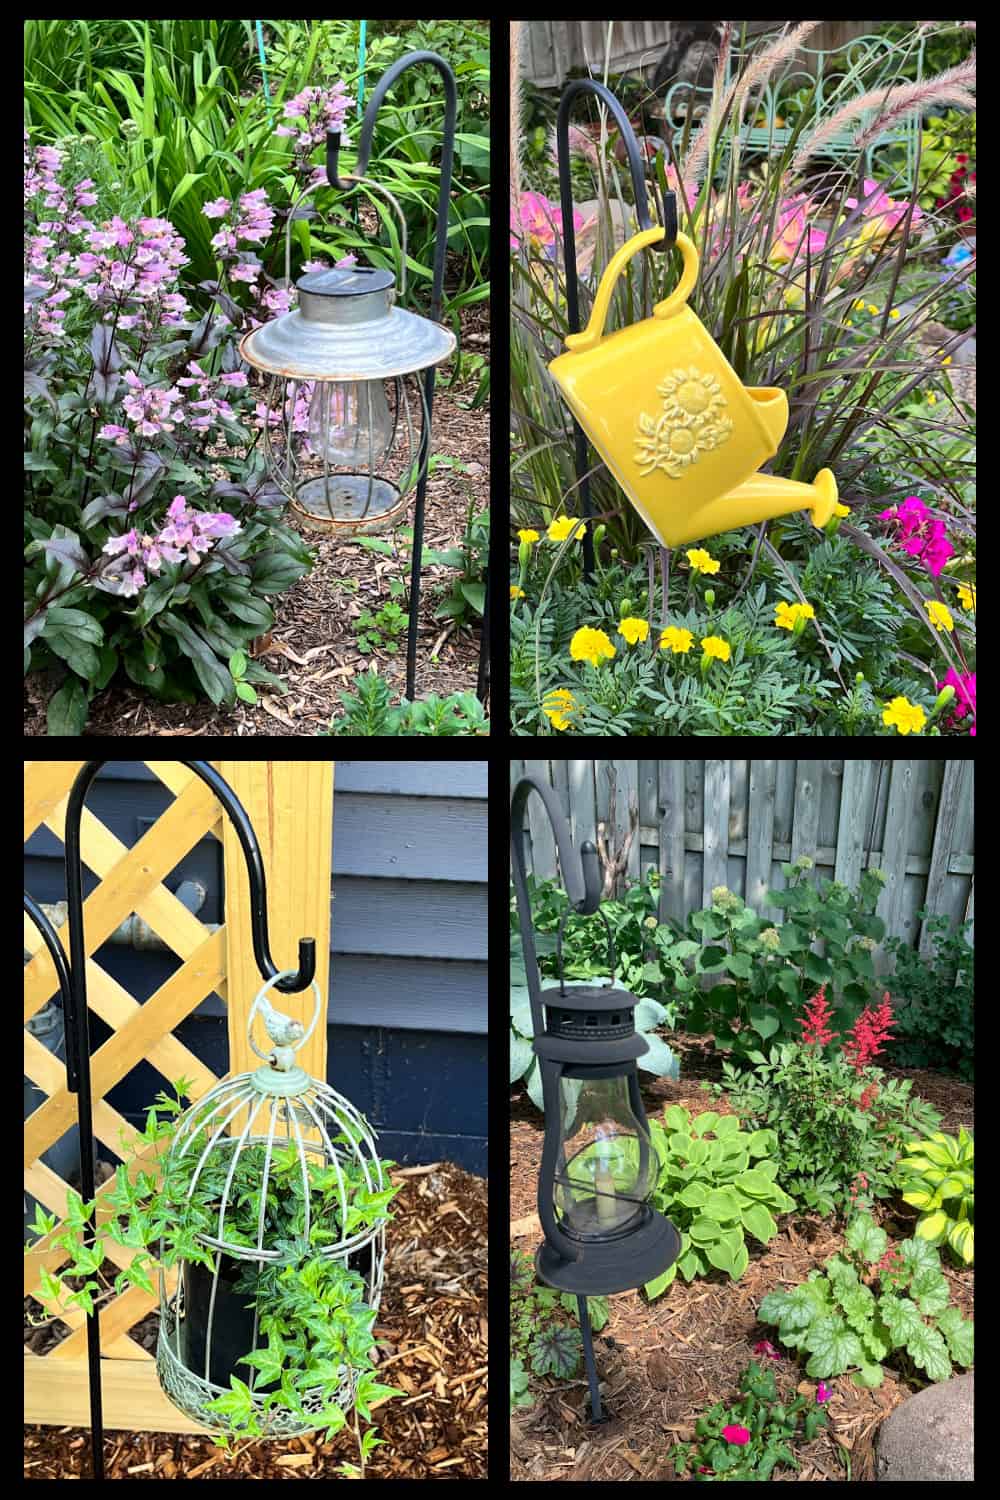 Collage of shepherd's hook stakes being used for various things in a garden.